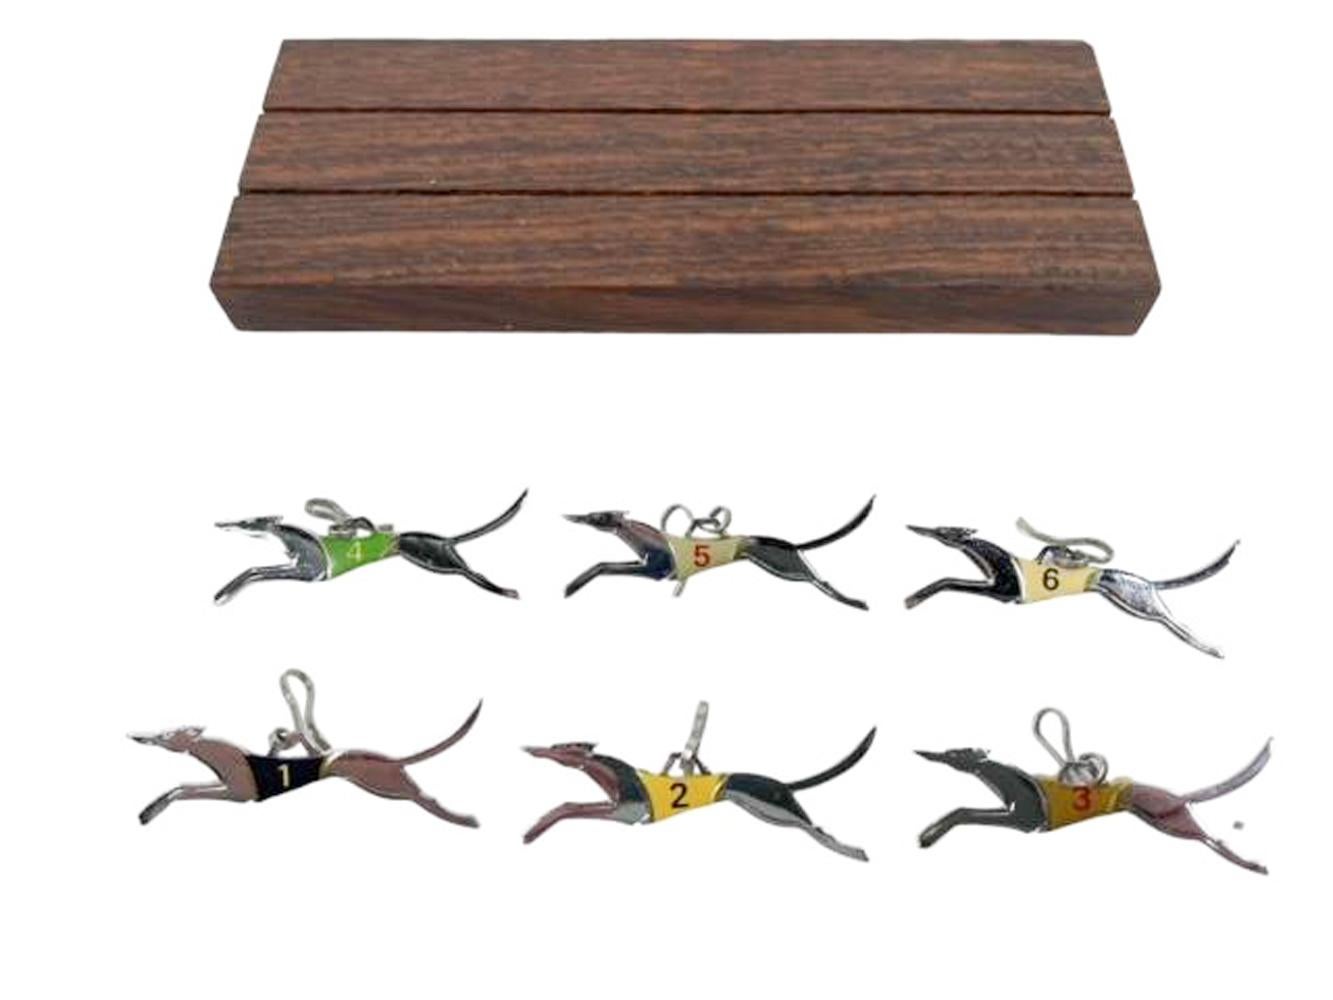 Chrome Set of Greyhound Dog Race Drinks Markers Numbered 1 - 6 in a Wooden Stand For Sale